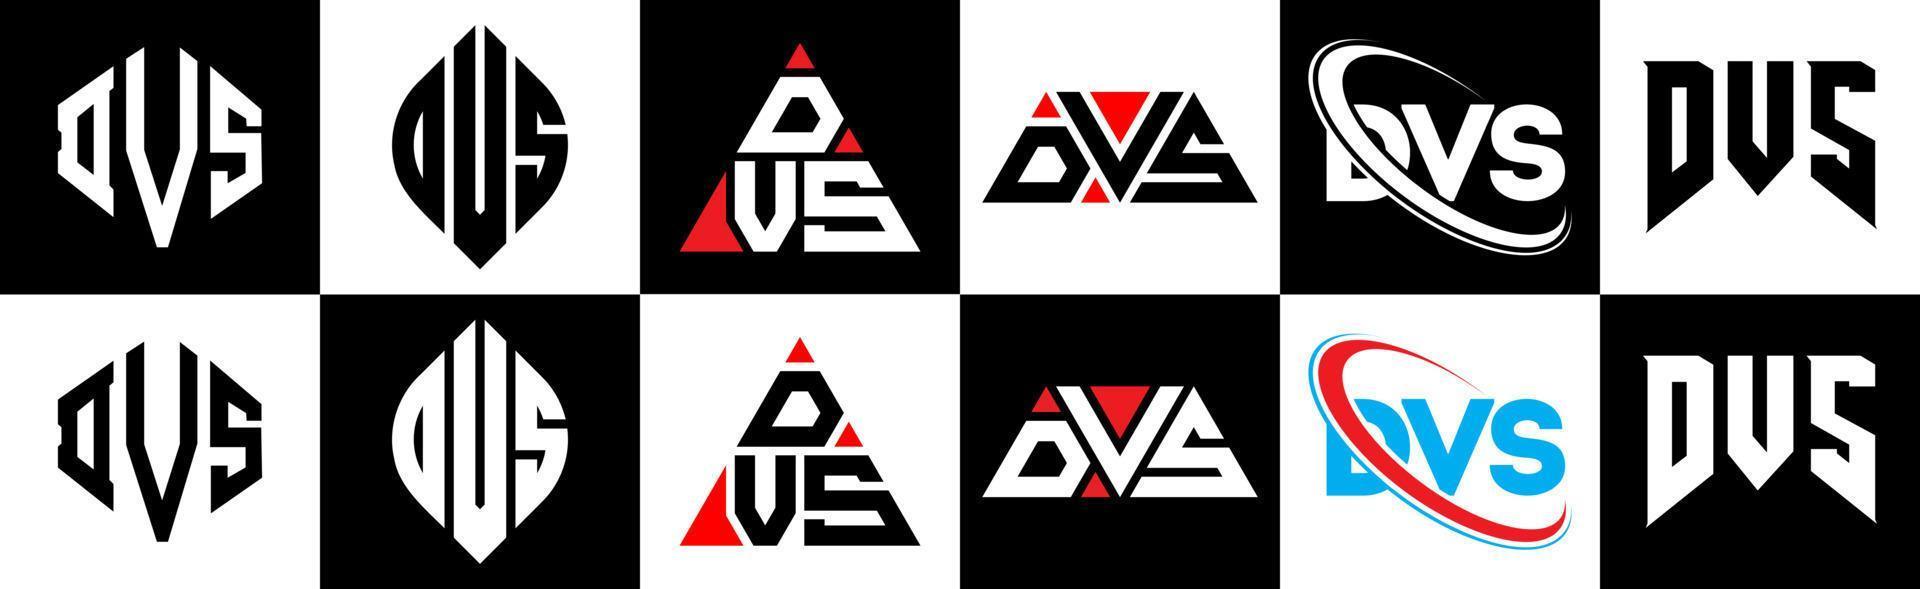 DVS letter logo design in six style. DVS polygon, circle, triangle, hexagon, flat and simple style with black and white color variation letter logo set in one artboard. DVS minimalist and classic logo vector